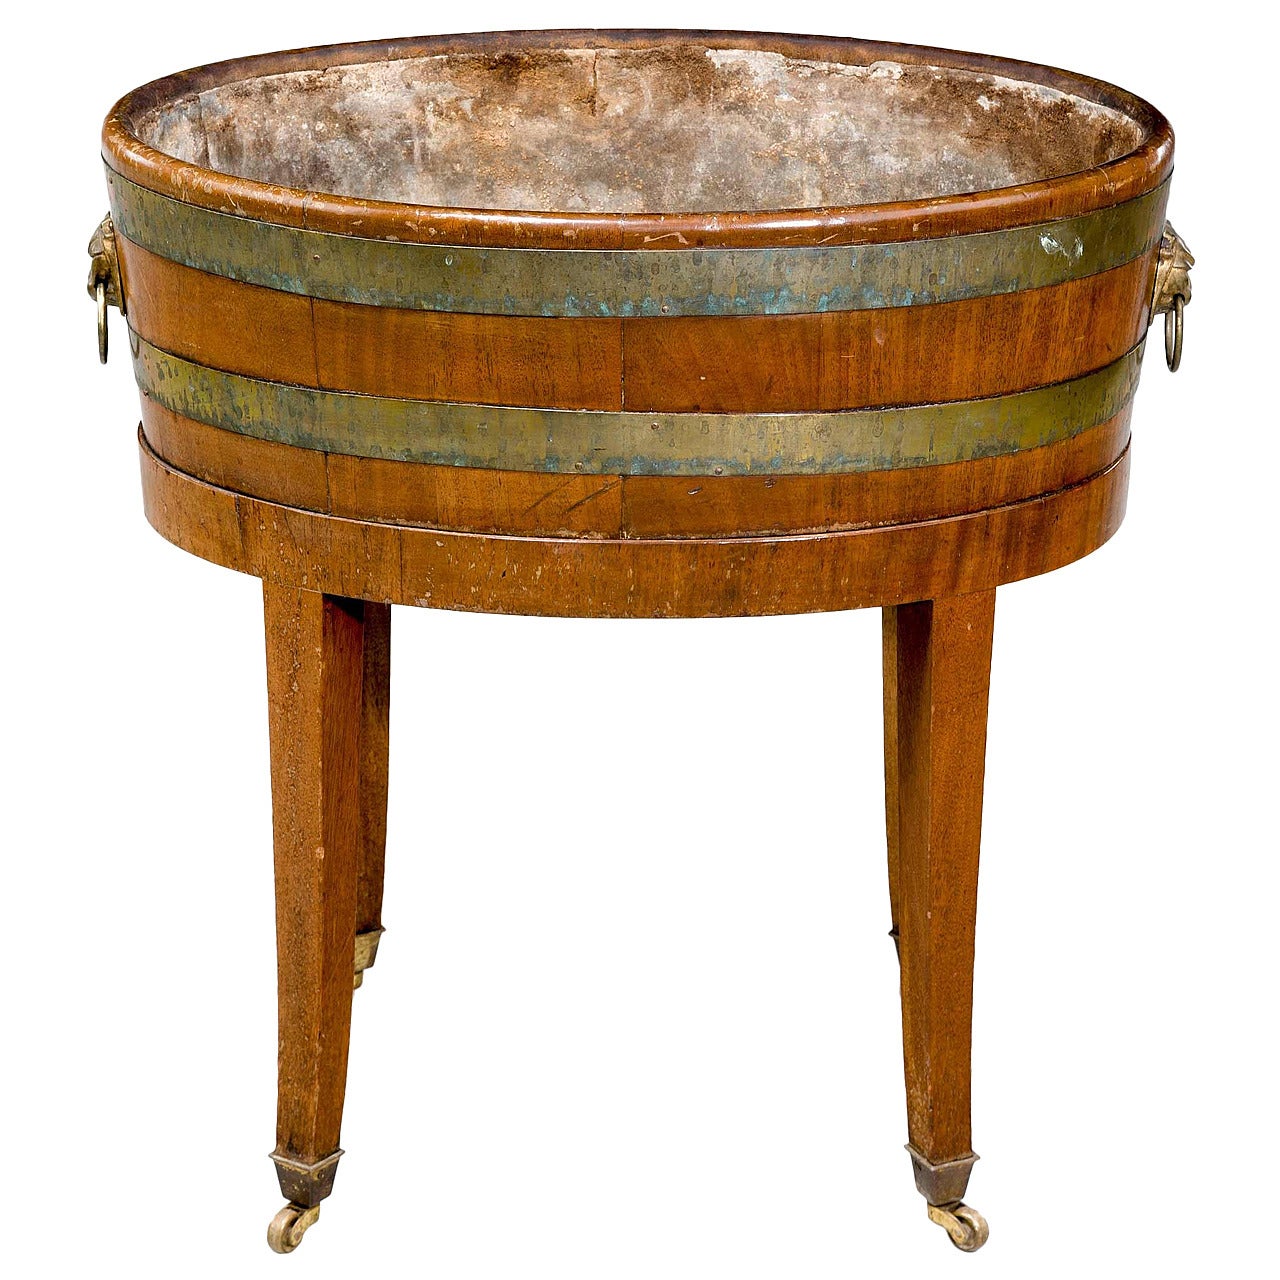 George III Period Wine Cooler with Original, Broad, Brass Bands